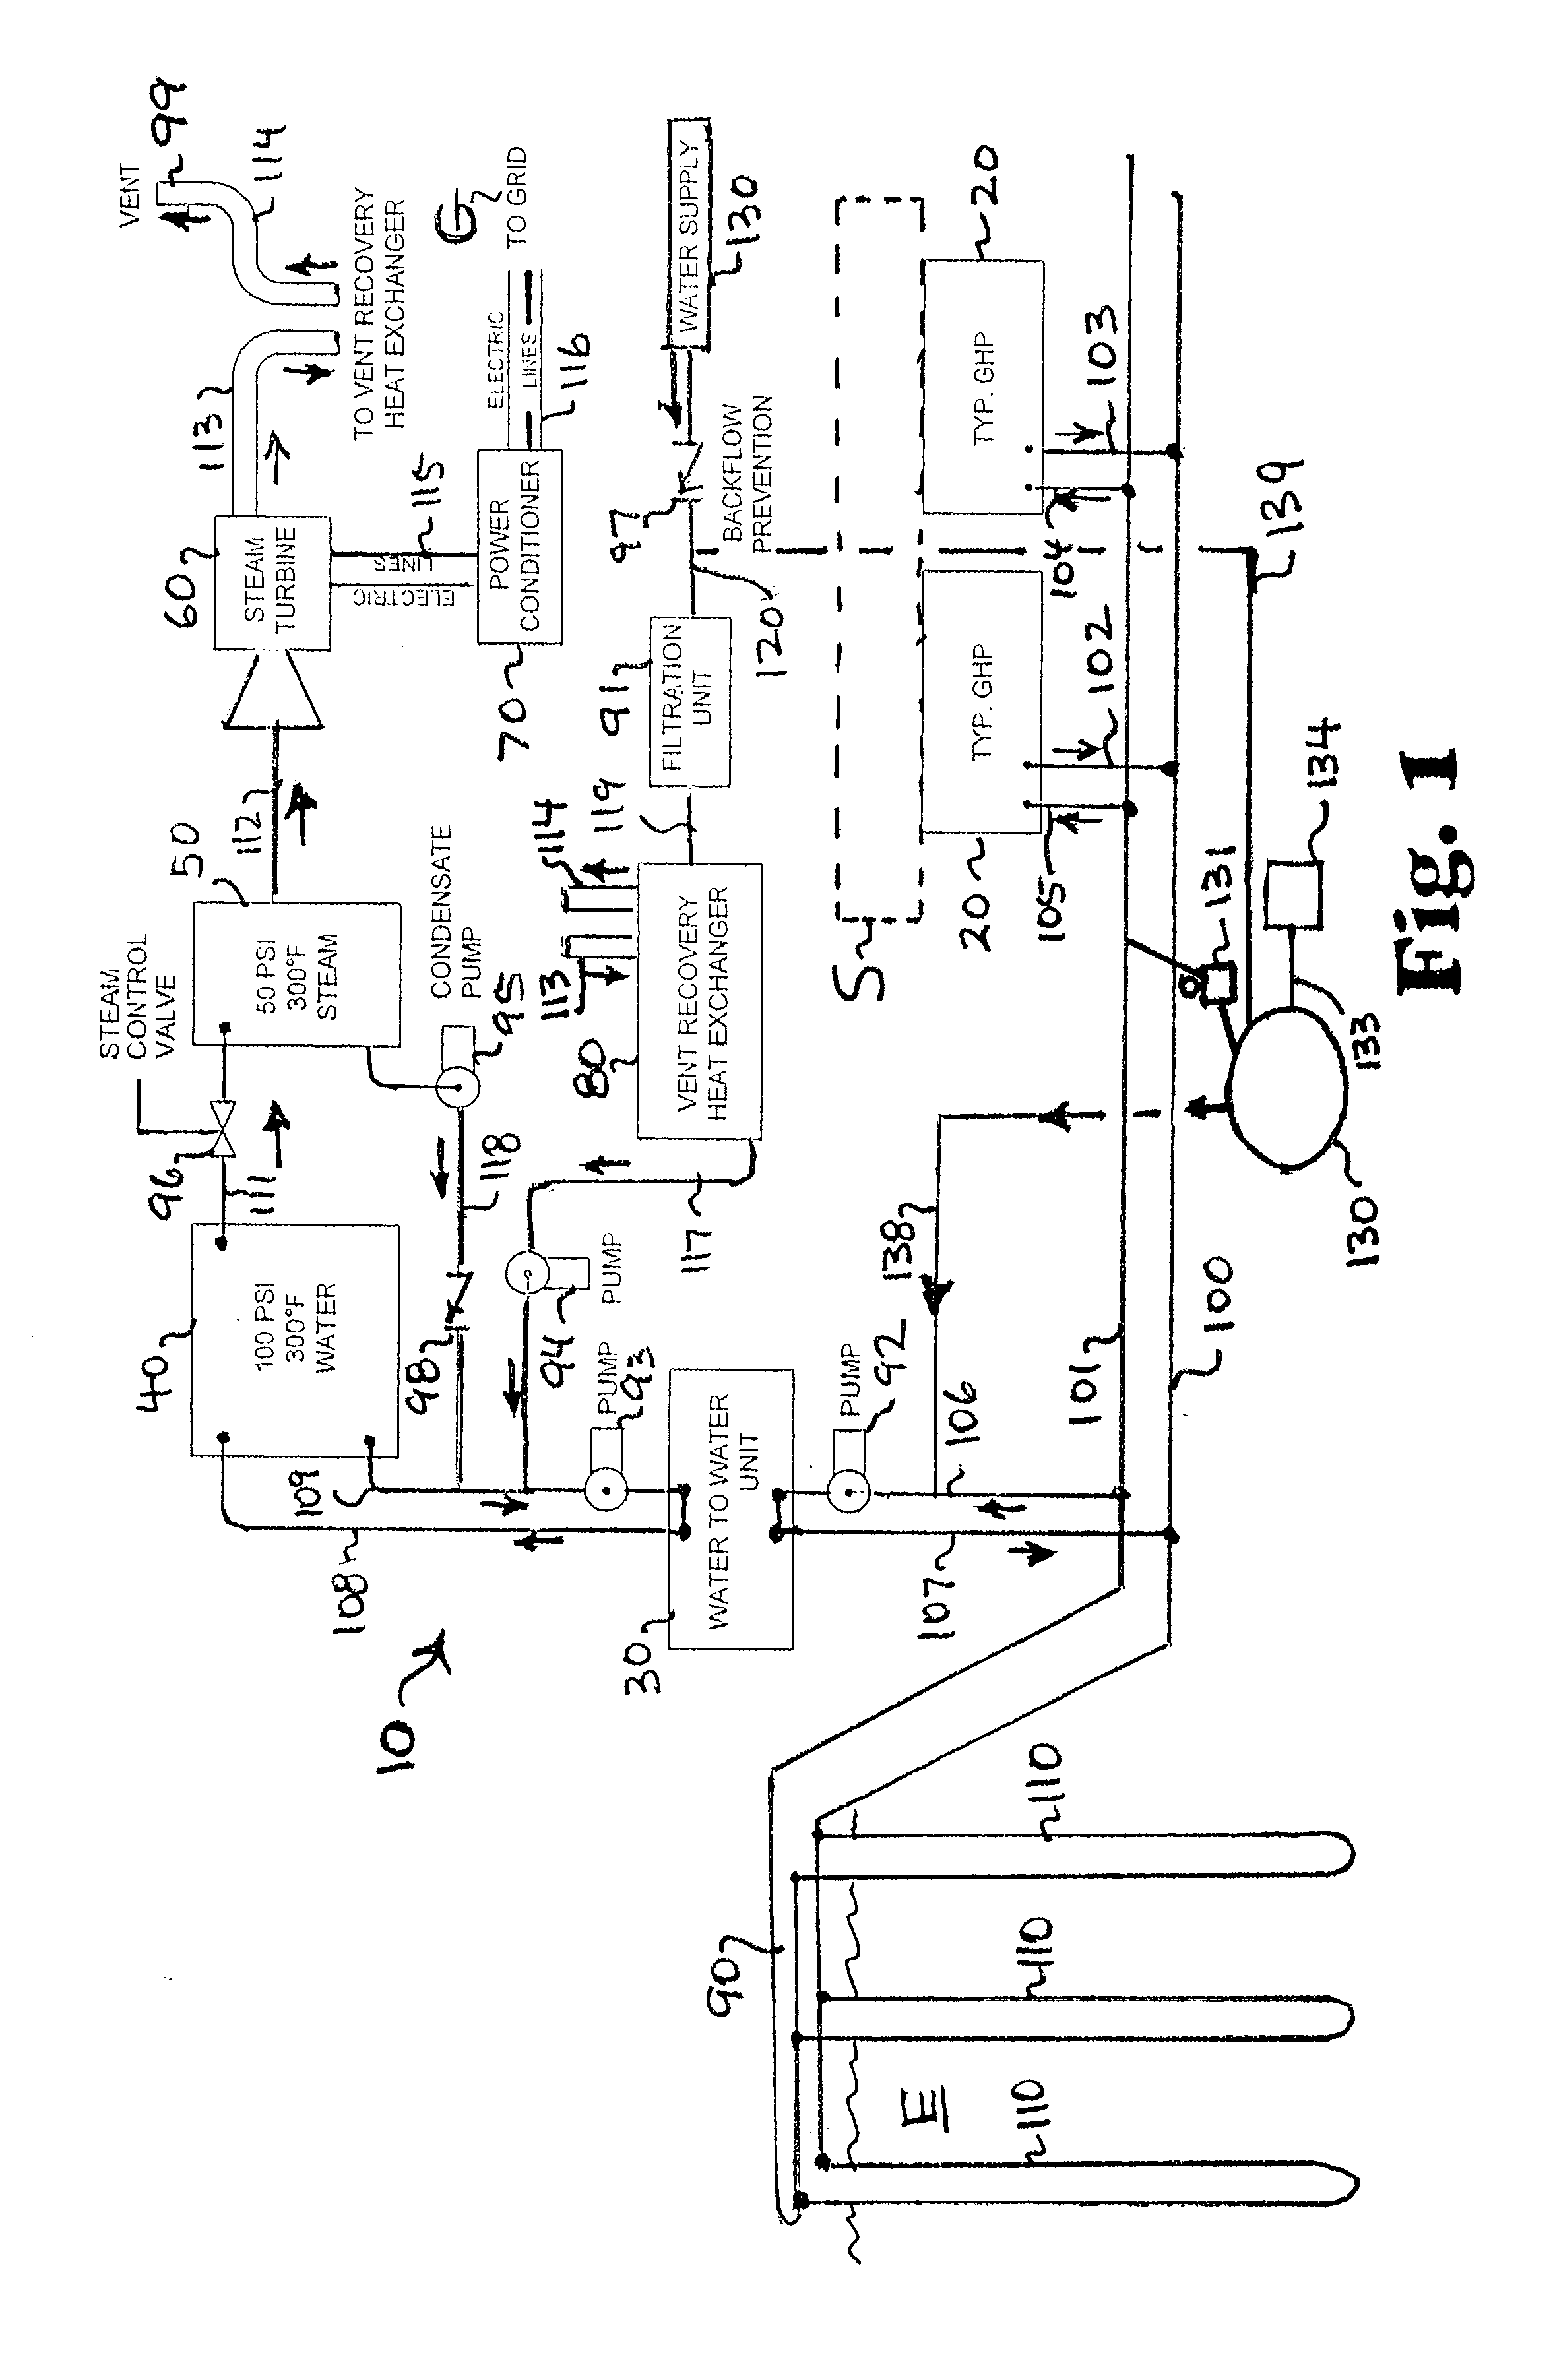 Power generation systems with earth heat transfer